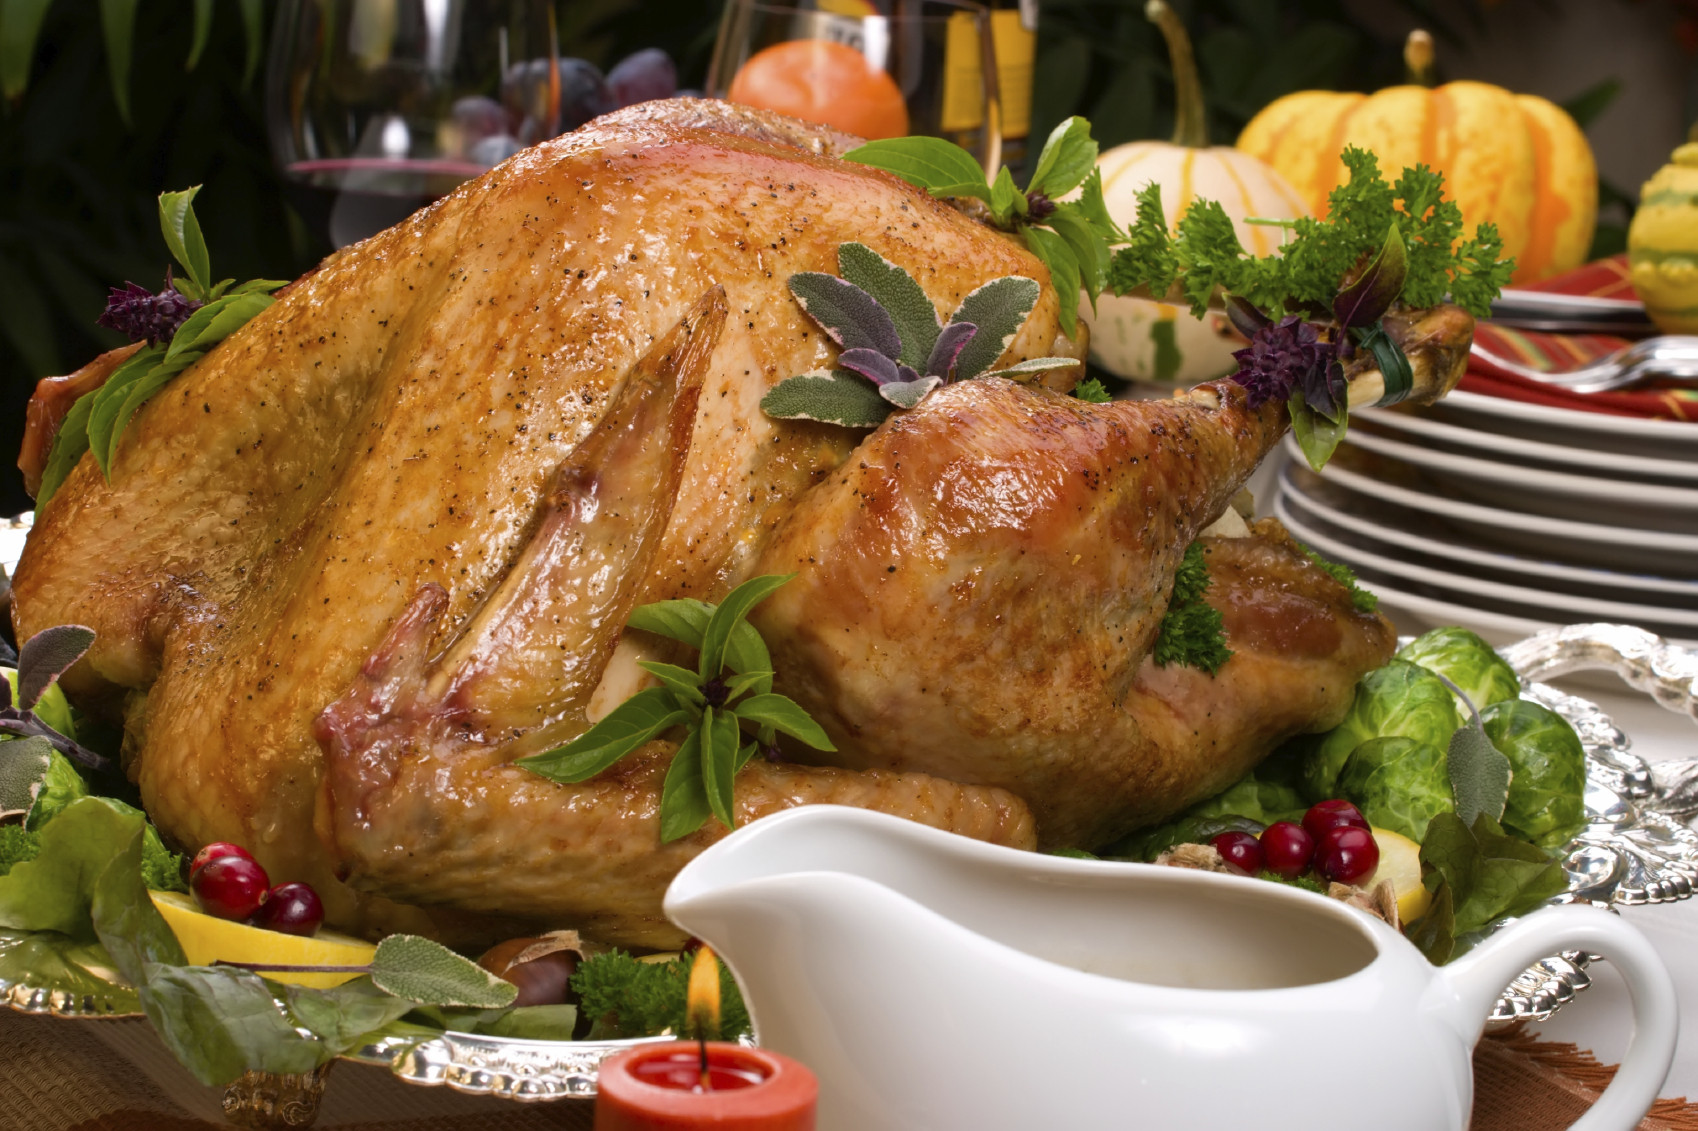 Prepare Thanksgiving Turkey
 Tips for preparing your holiday turkey – News from